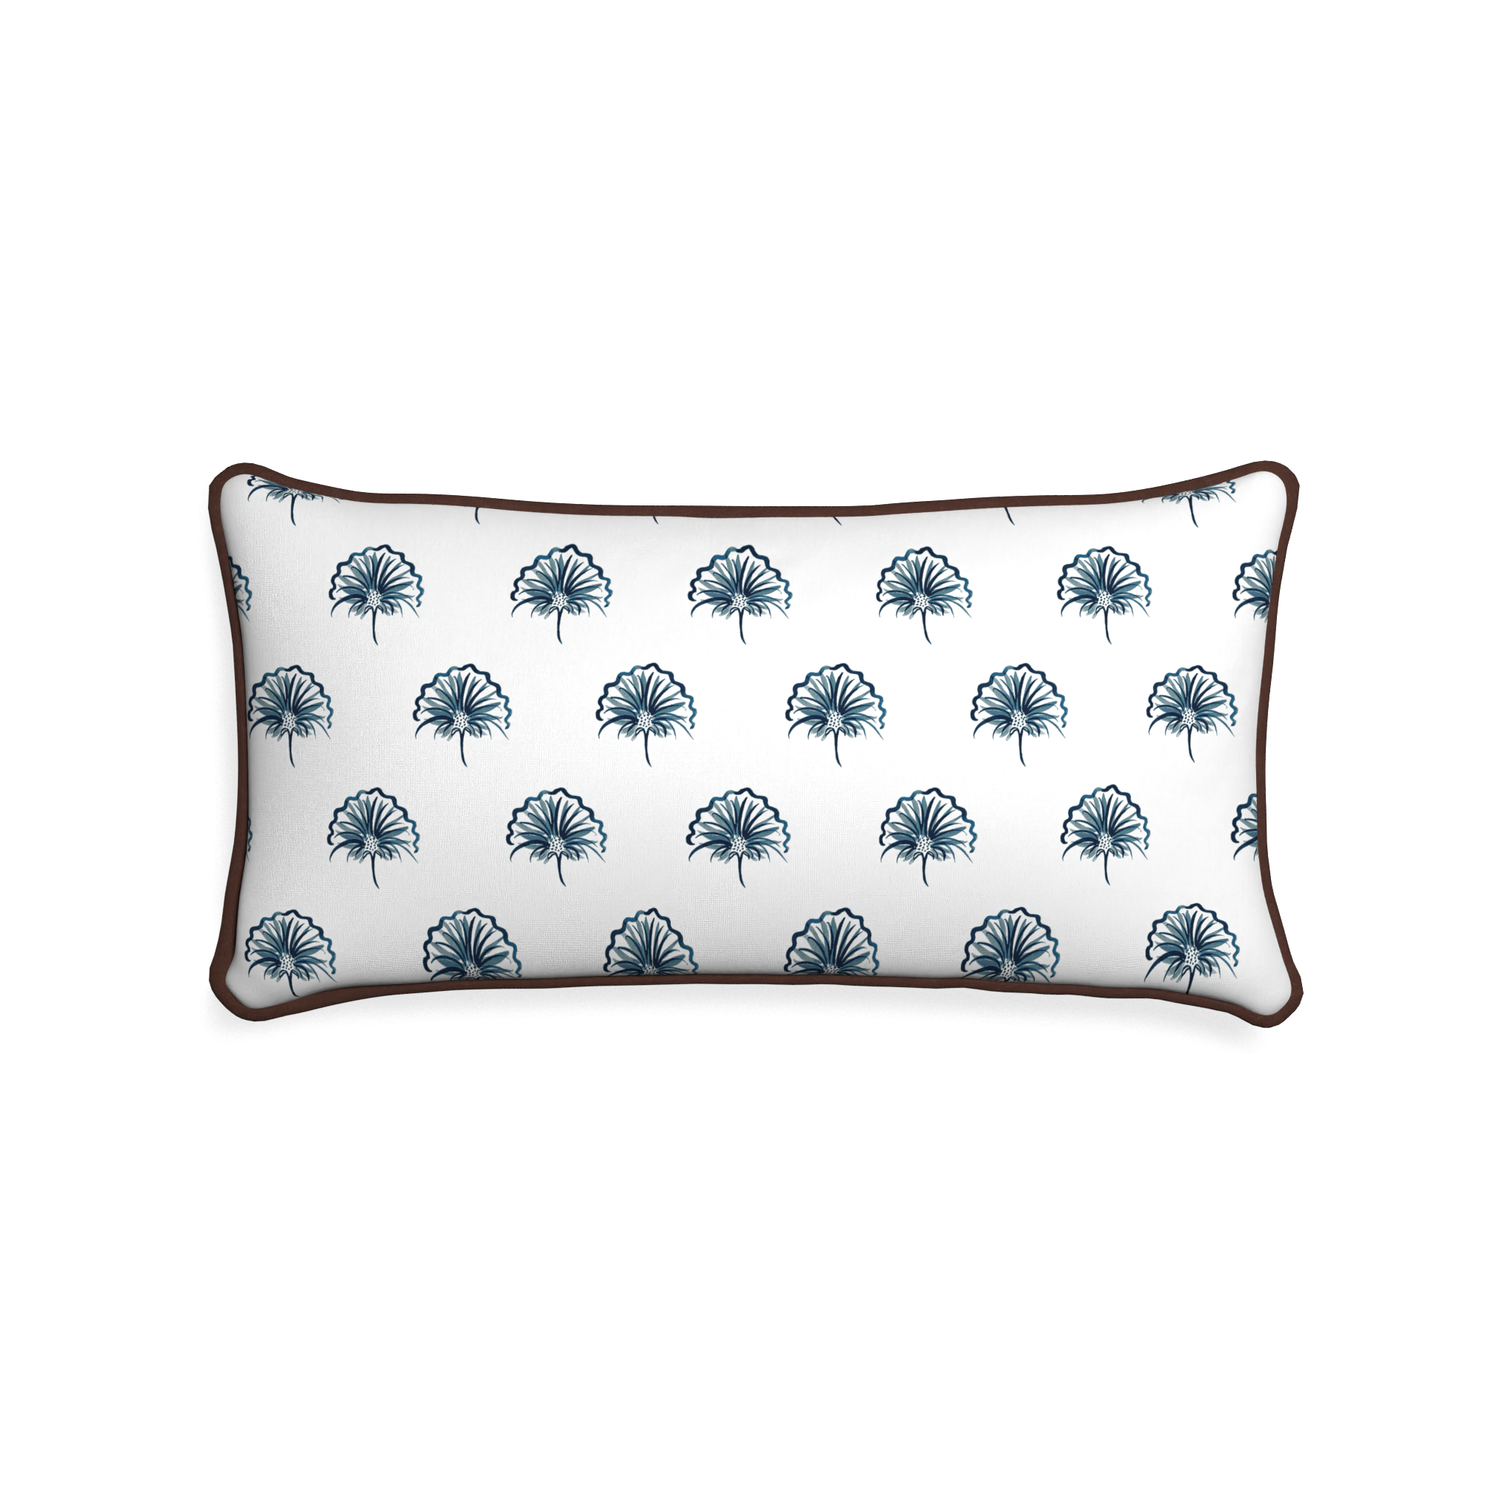 Midi-lumbar penelope midnight custom floral navypillow with w piping on white background